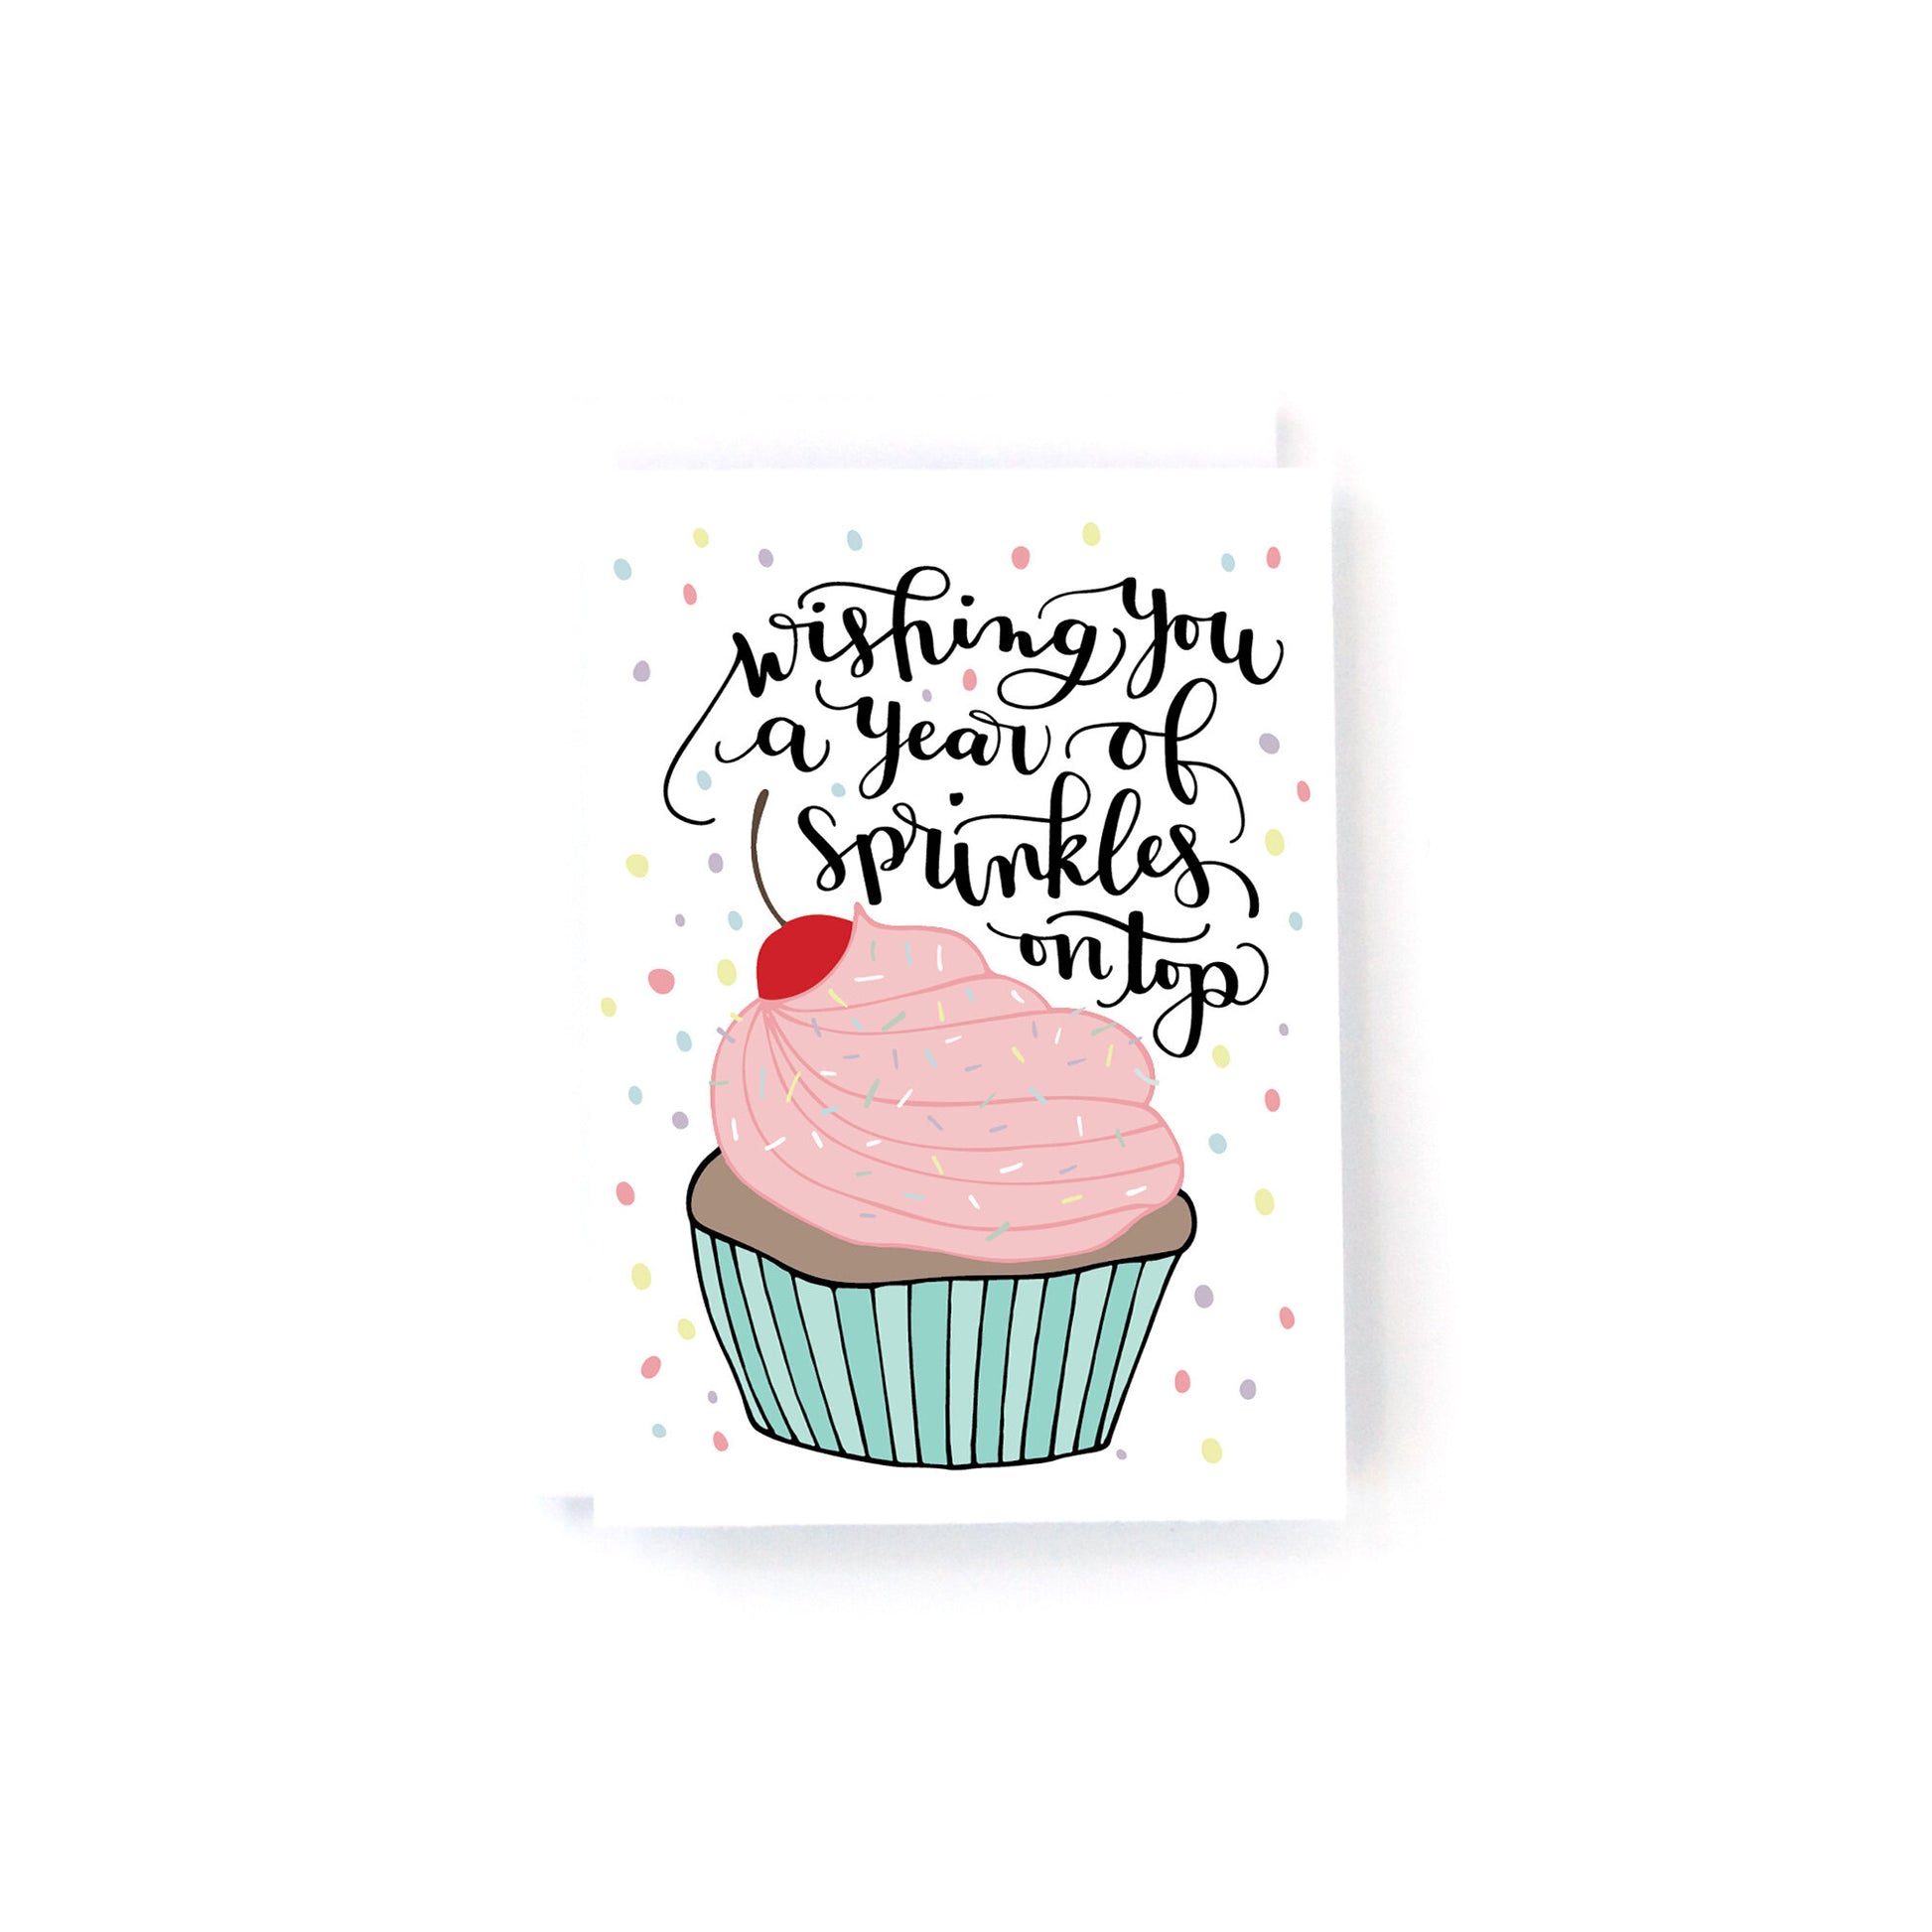 mini birthday card with a pink and blue cupcake surrounded by confetti with the text, wishing you a year of sprinkles on top.